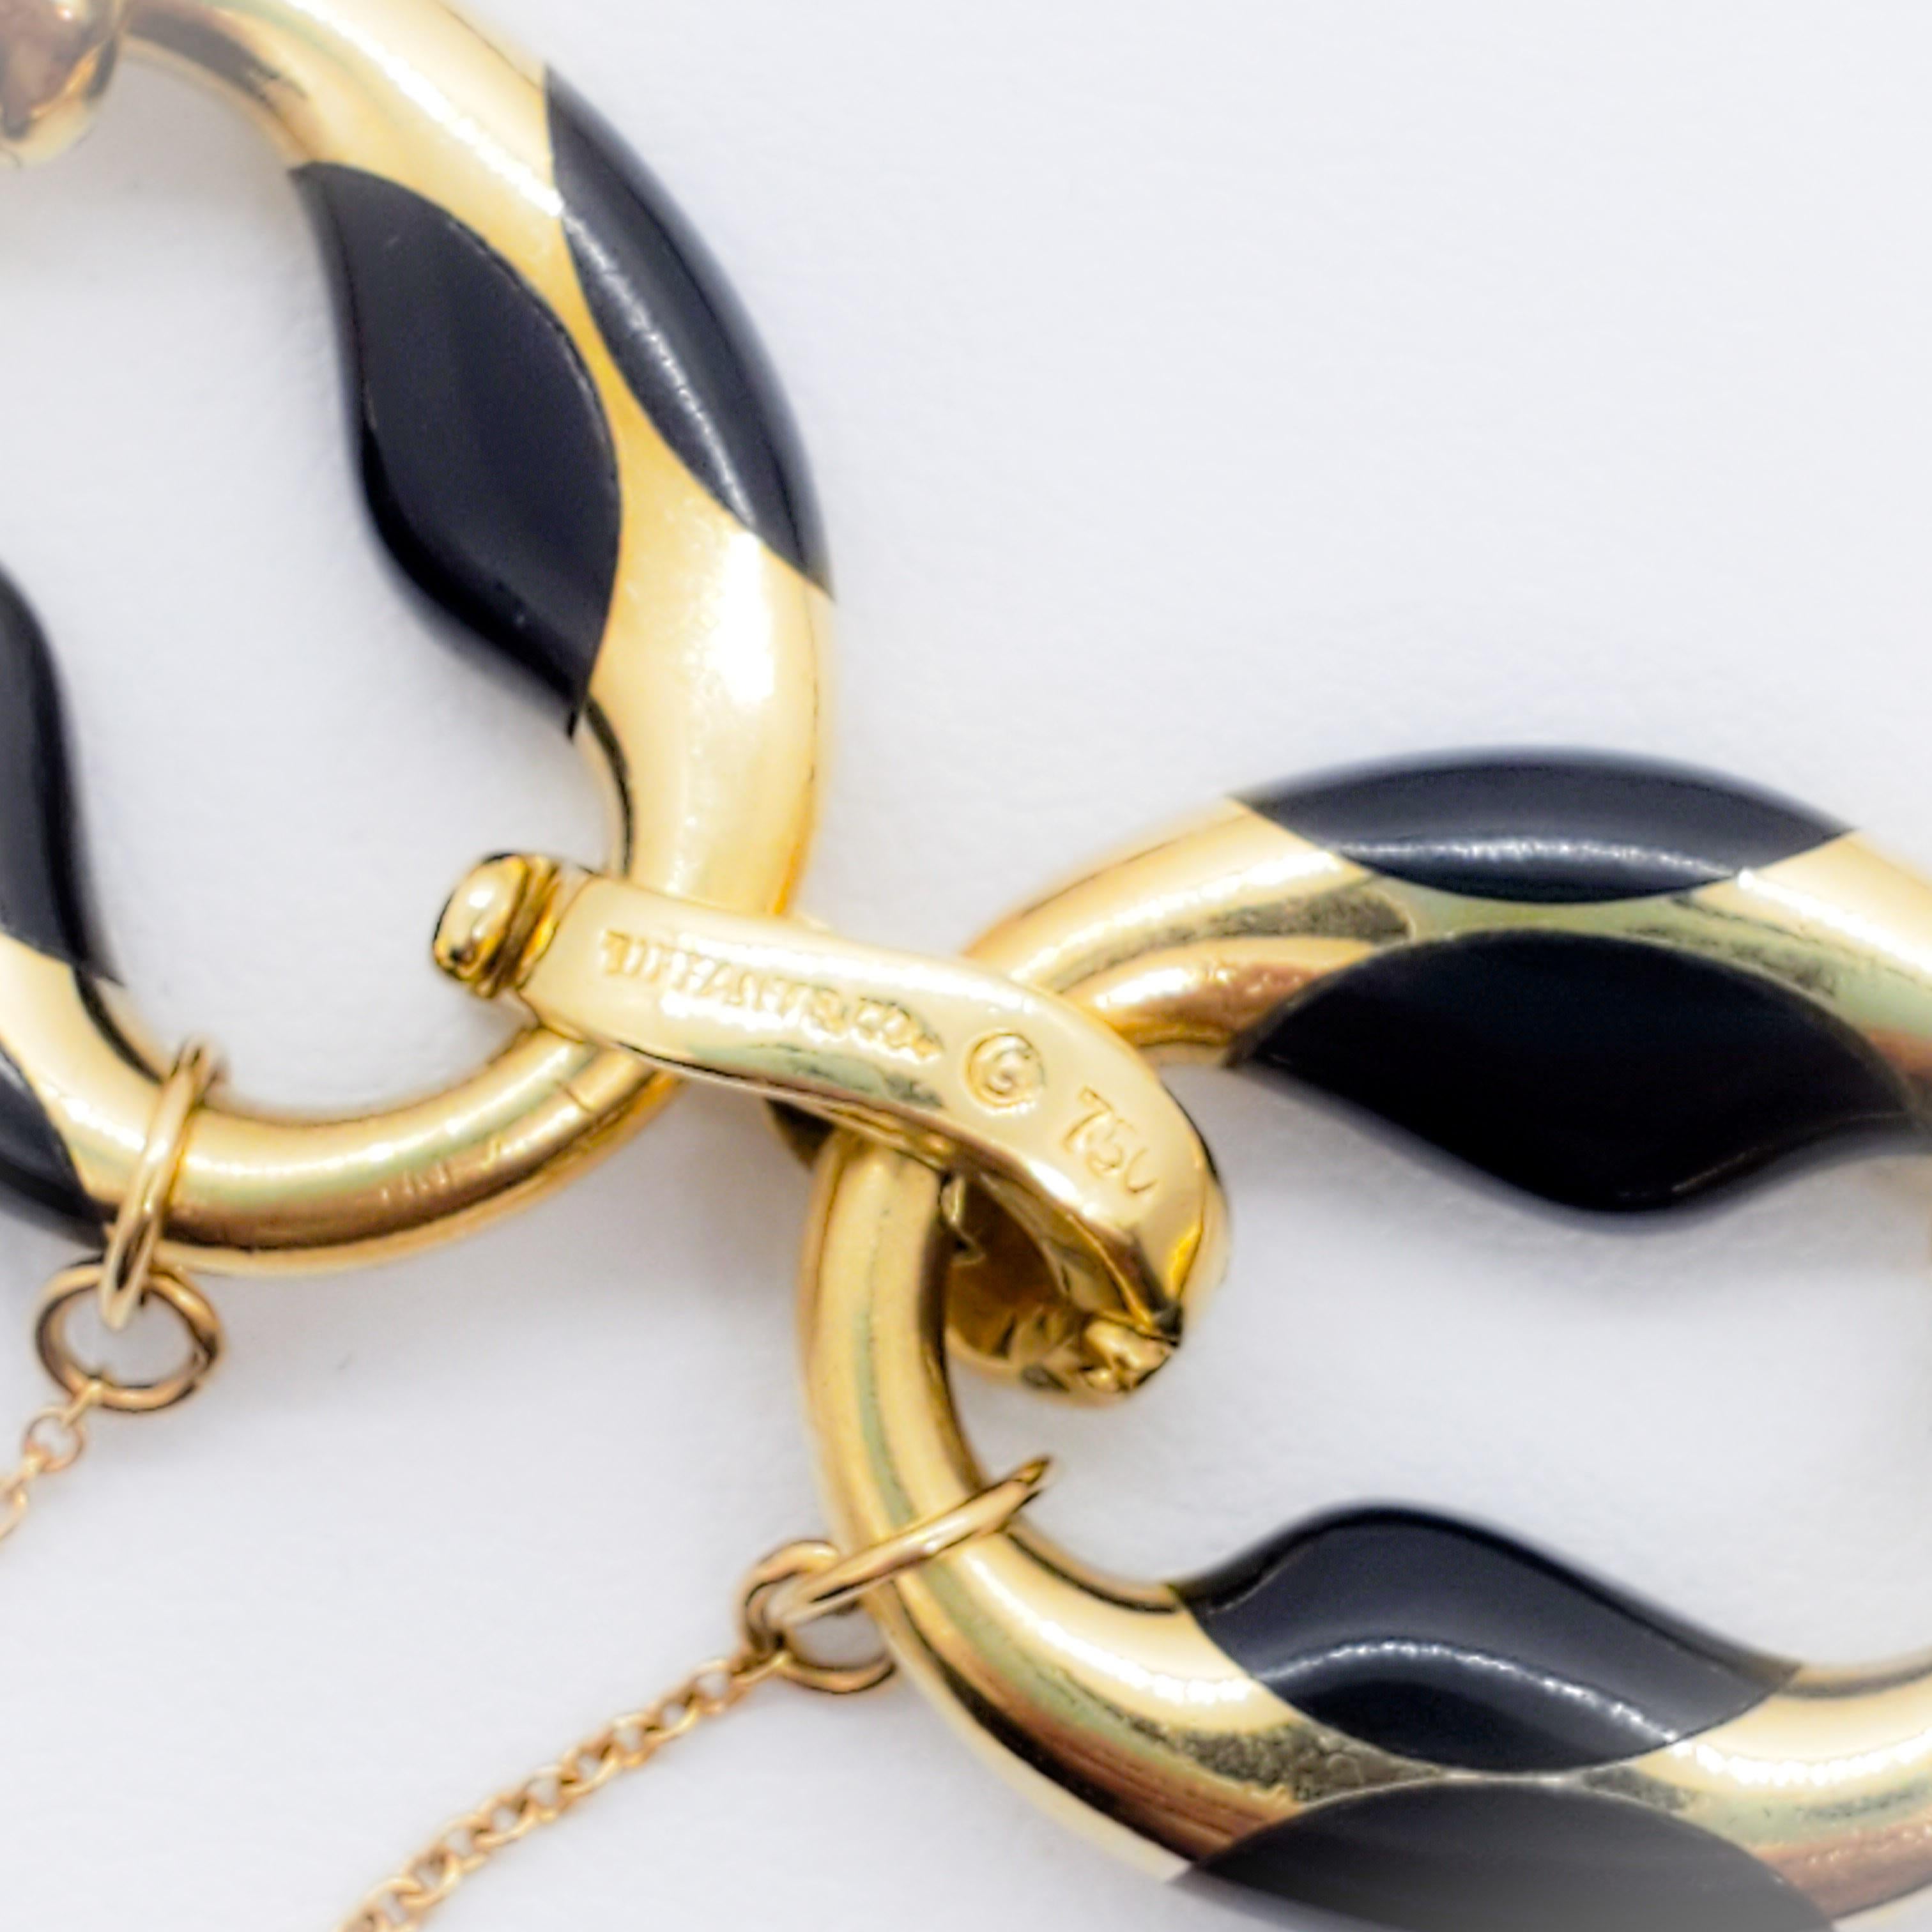 Hard to find black enamel and yellow gold bracelet by legendary designer Angela Cummings for Tiffany & Company.  This bracelet is a collector's dream come true.  From the prestigious line of Angela Cummings, that bracelet is the epitome of her